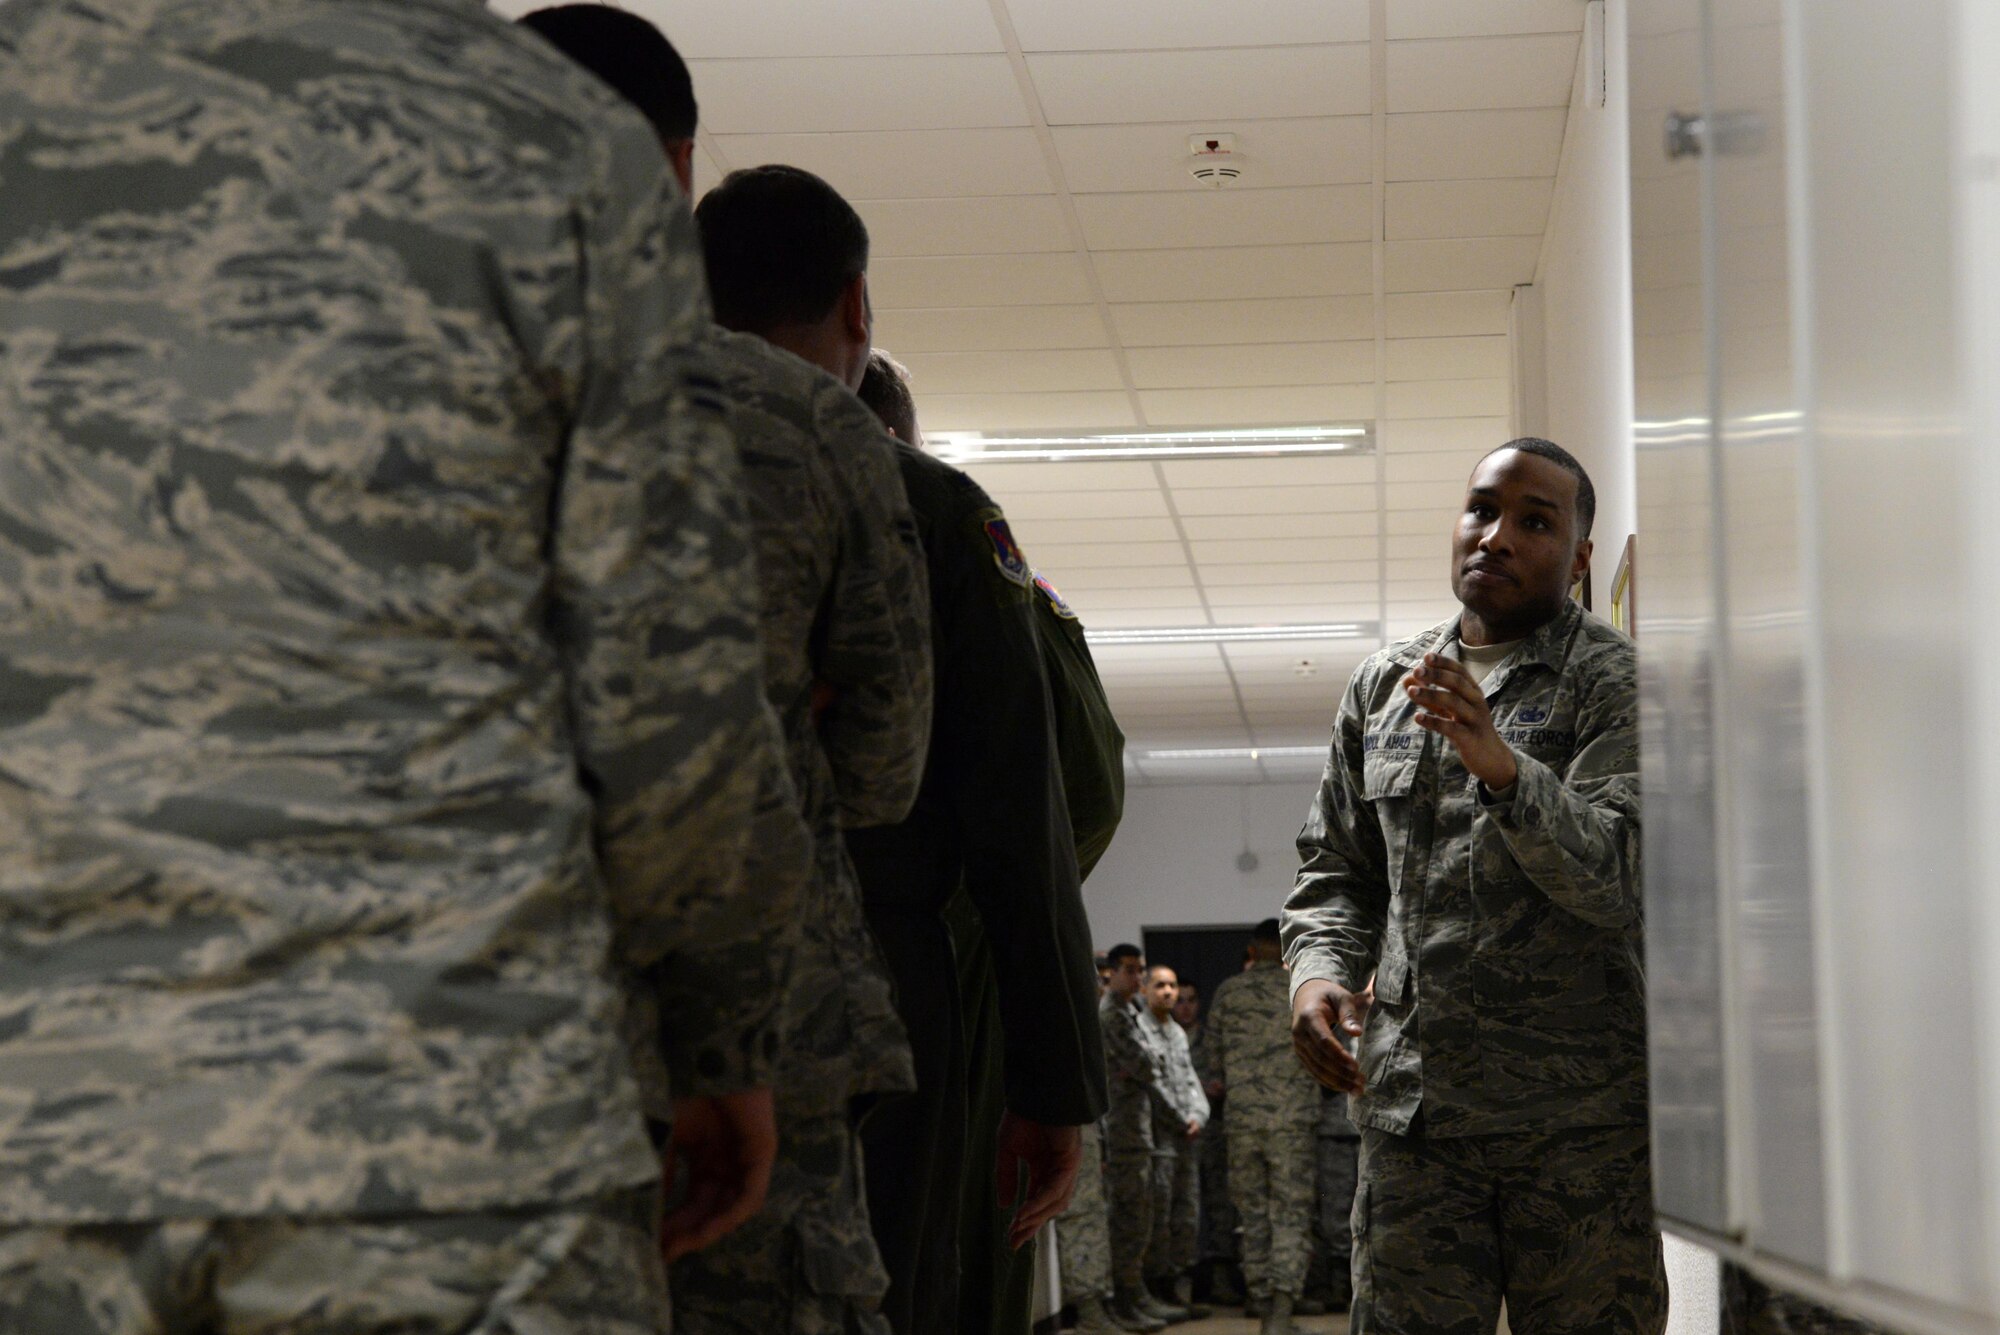 Staff Sgt. Karriem Abdulahad, 86th Security Forces Squadron training instructor, demonstrates how to correctly exit a facility during an active shooter situation at Ramstein Air Base, Germany, Dec. 15, 2016. During the EAST course Abdulahad simplifies uncommon thought processes giving Airmen the best chance for survival. (U.S. Air Force photo by Airman 1st Class D. Blake Browning)